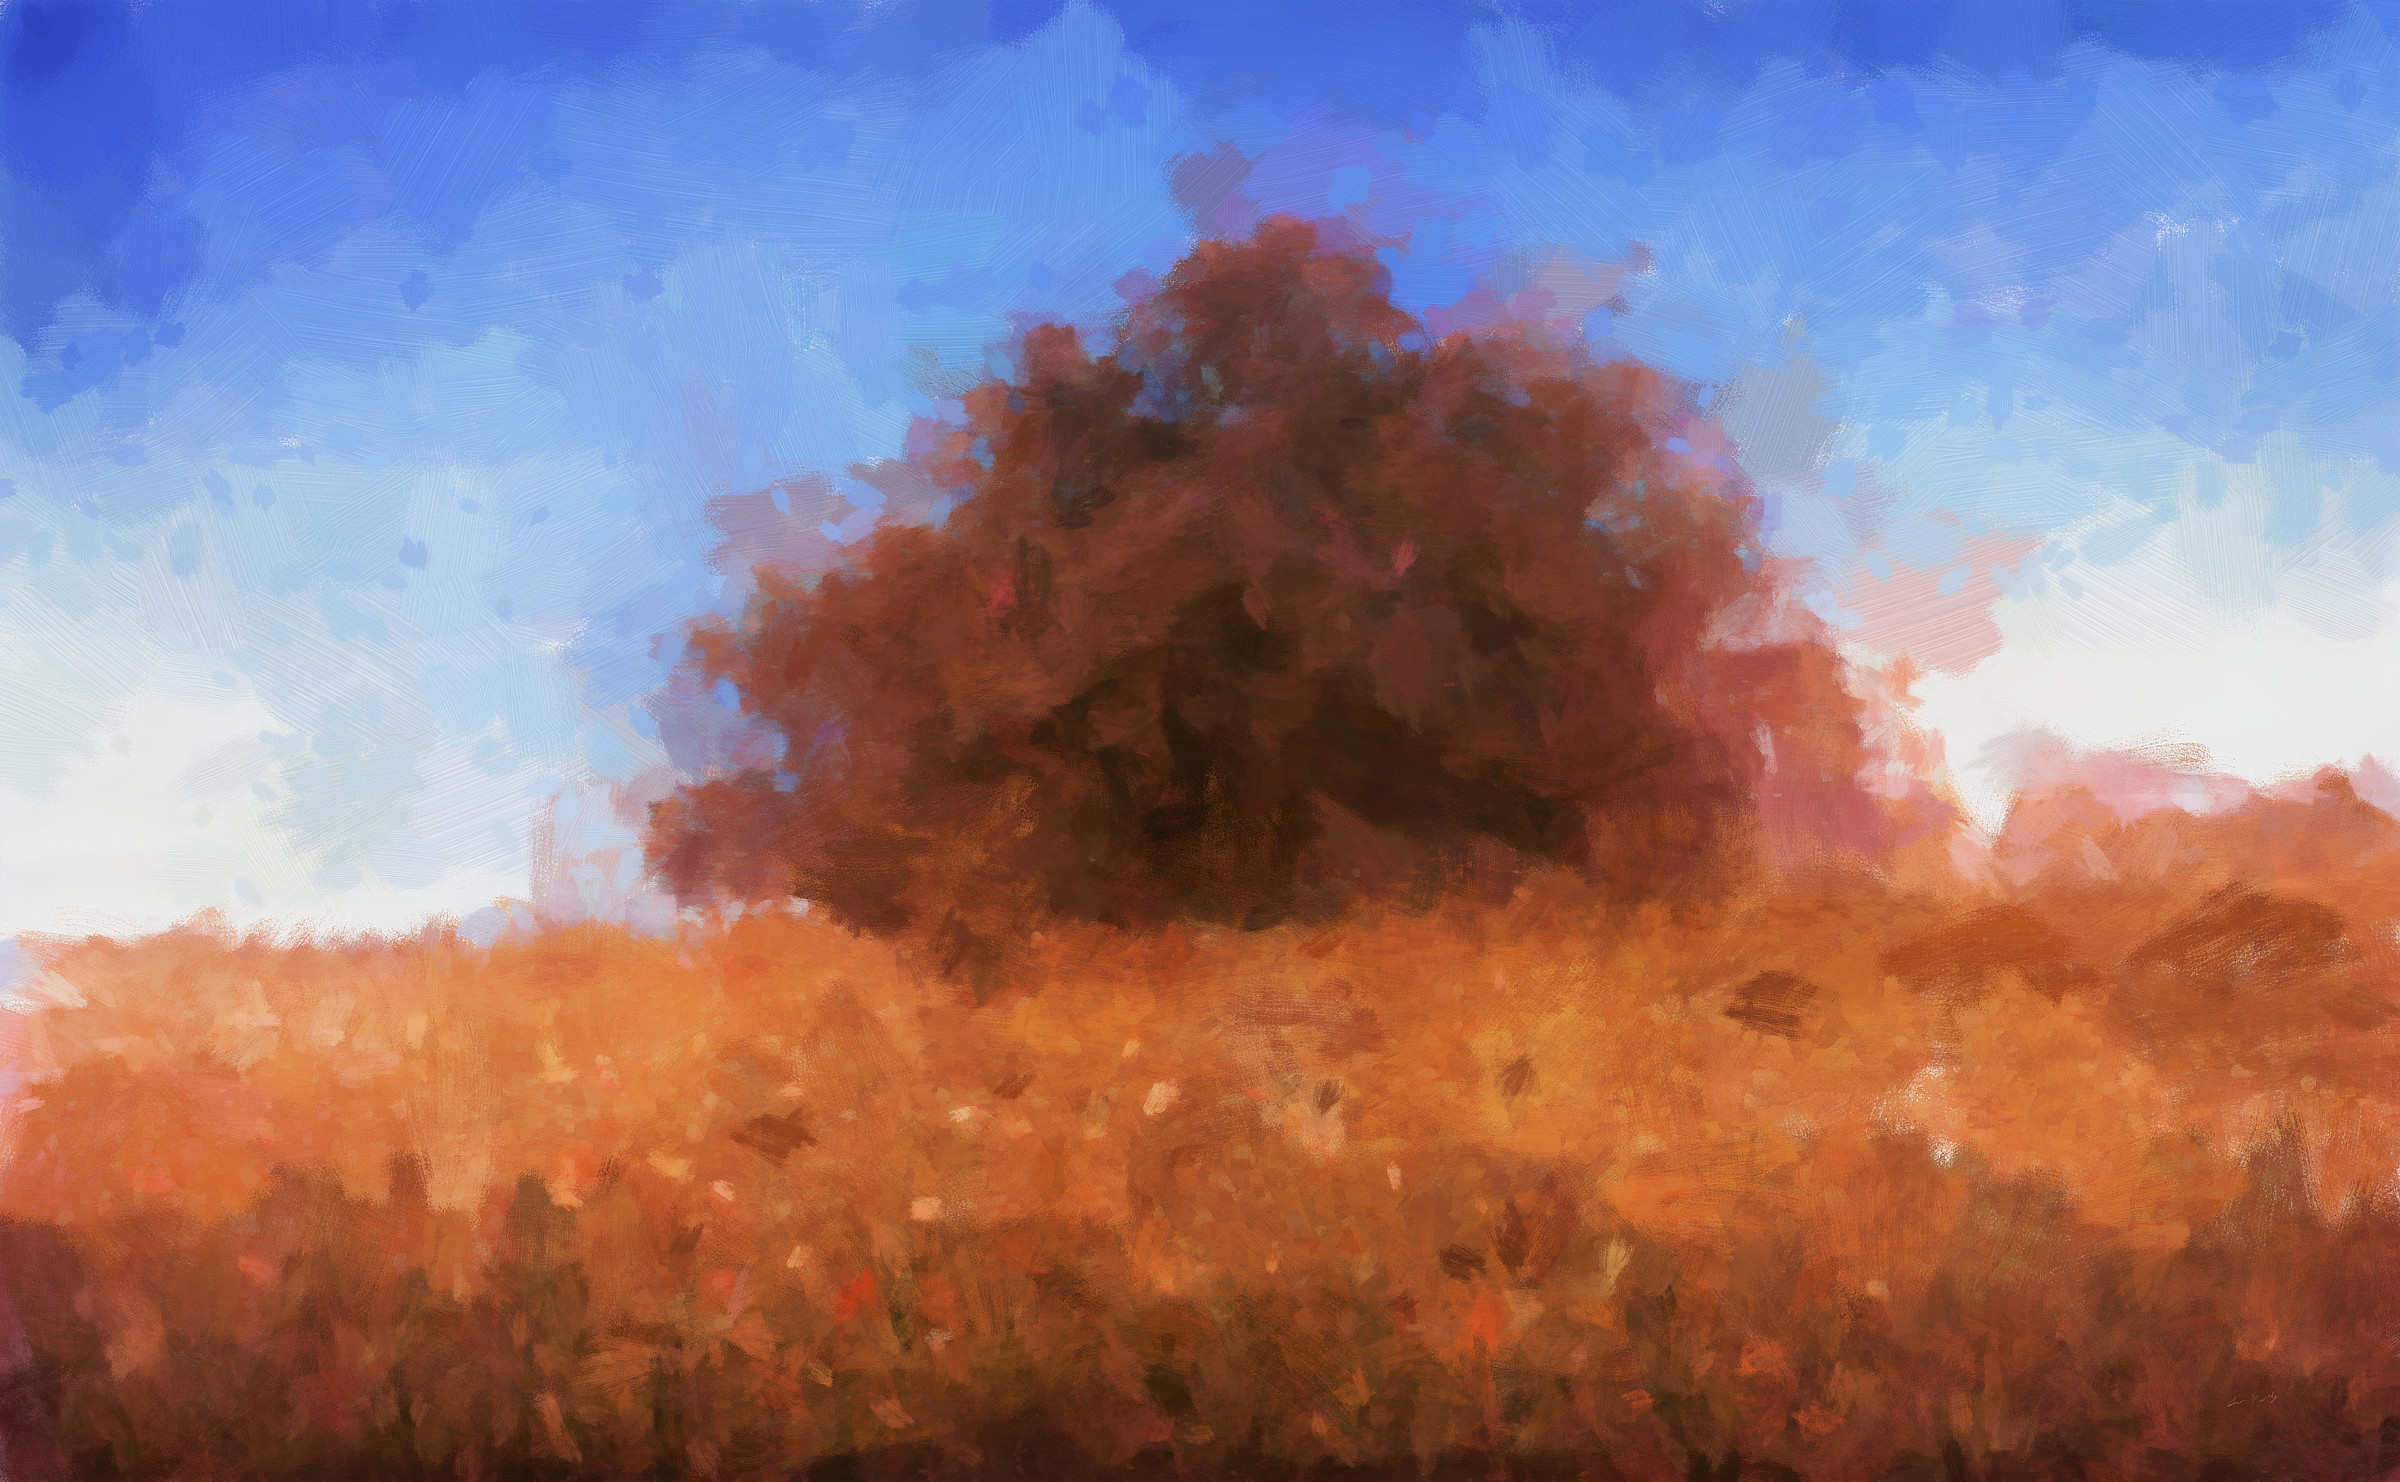 Digital abstract painting in a traditional painterly style.